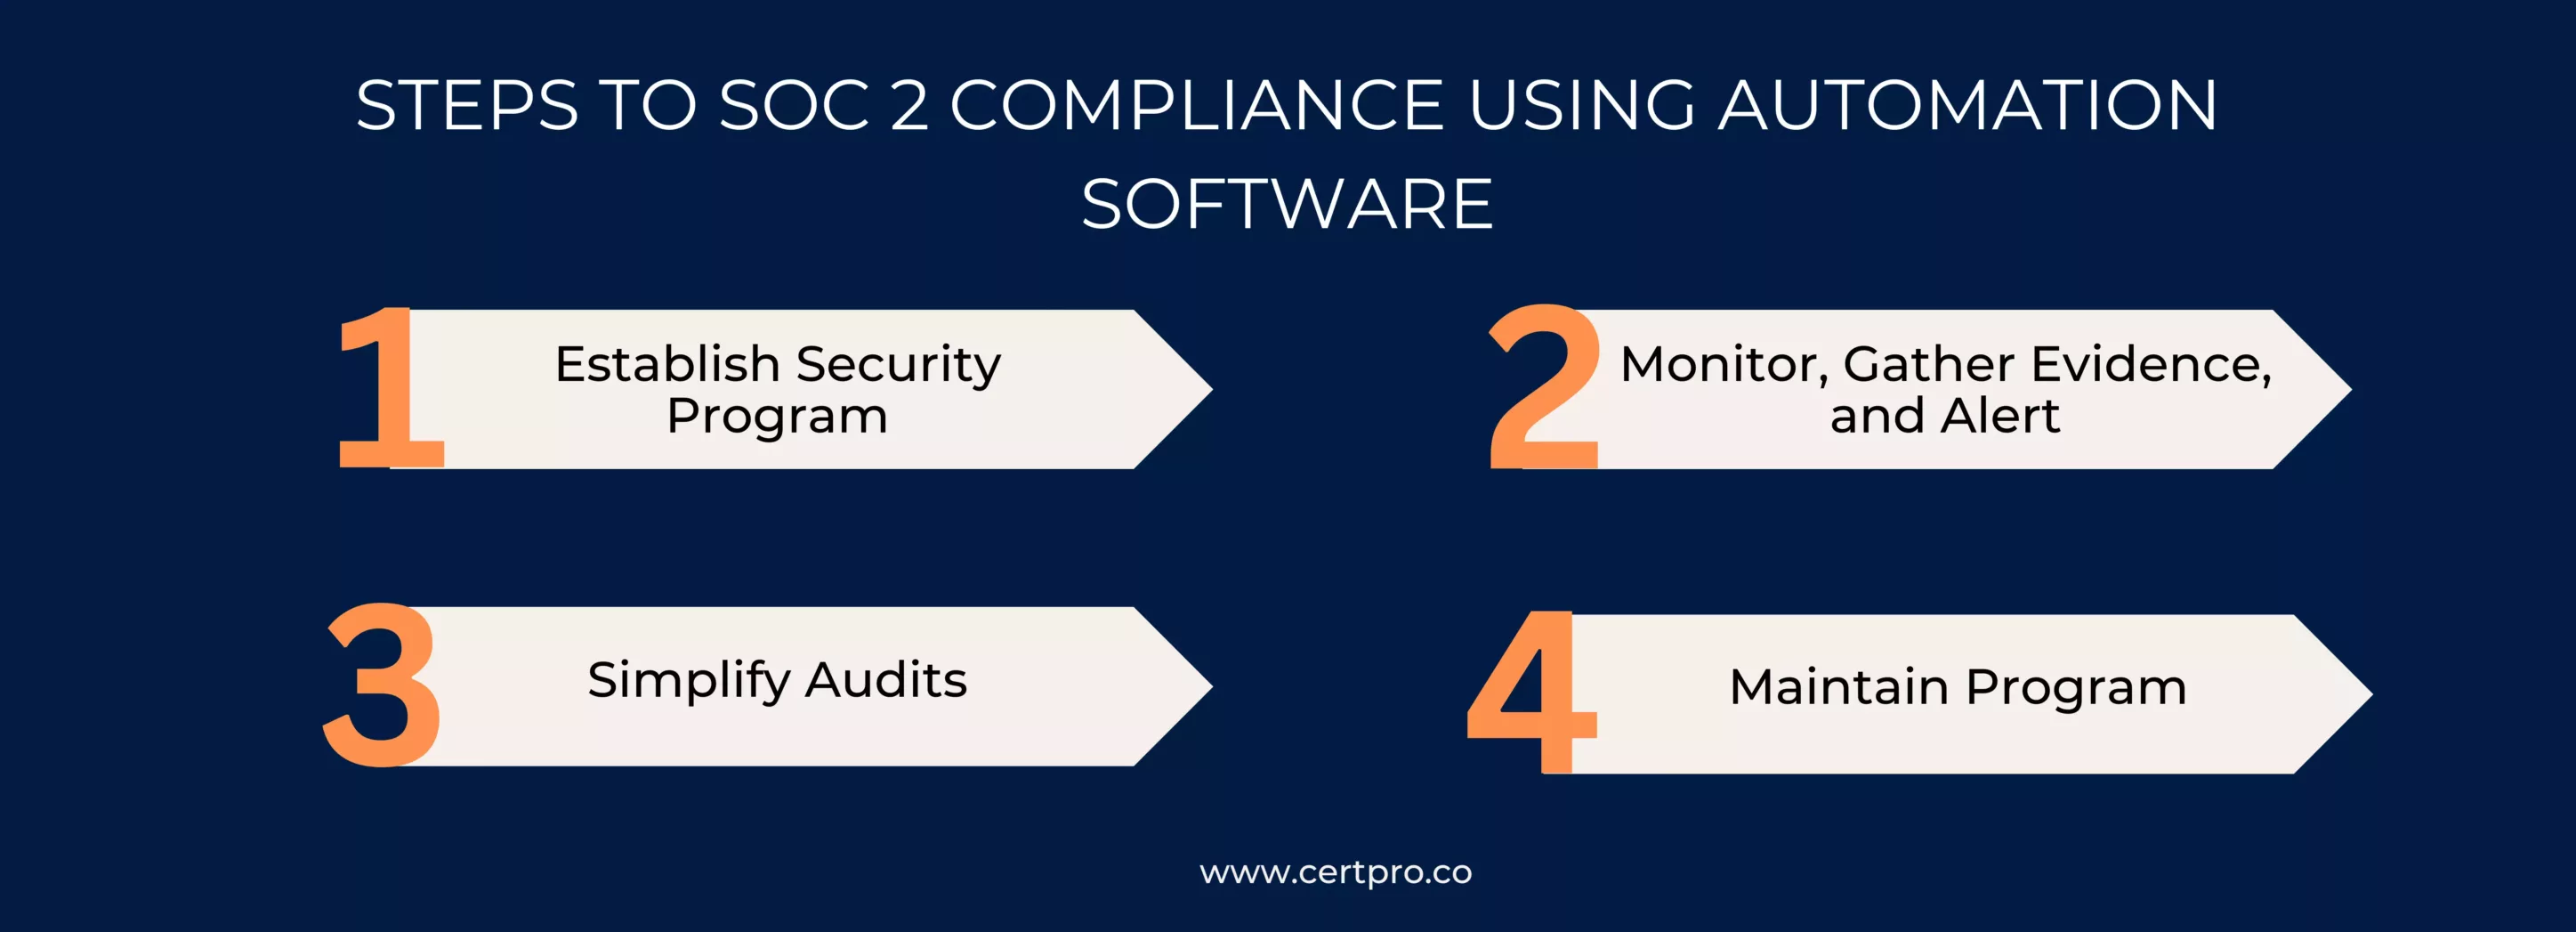 Steps to SOC 2 compliance using automation software